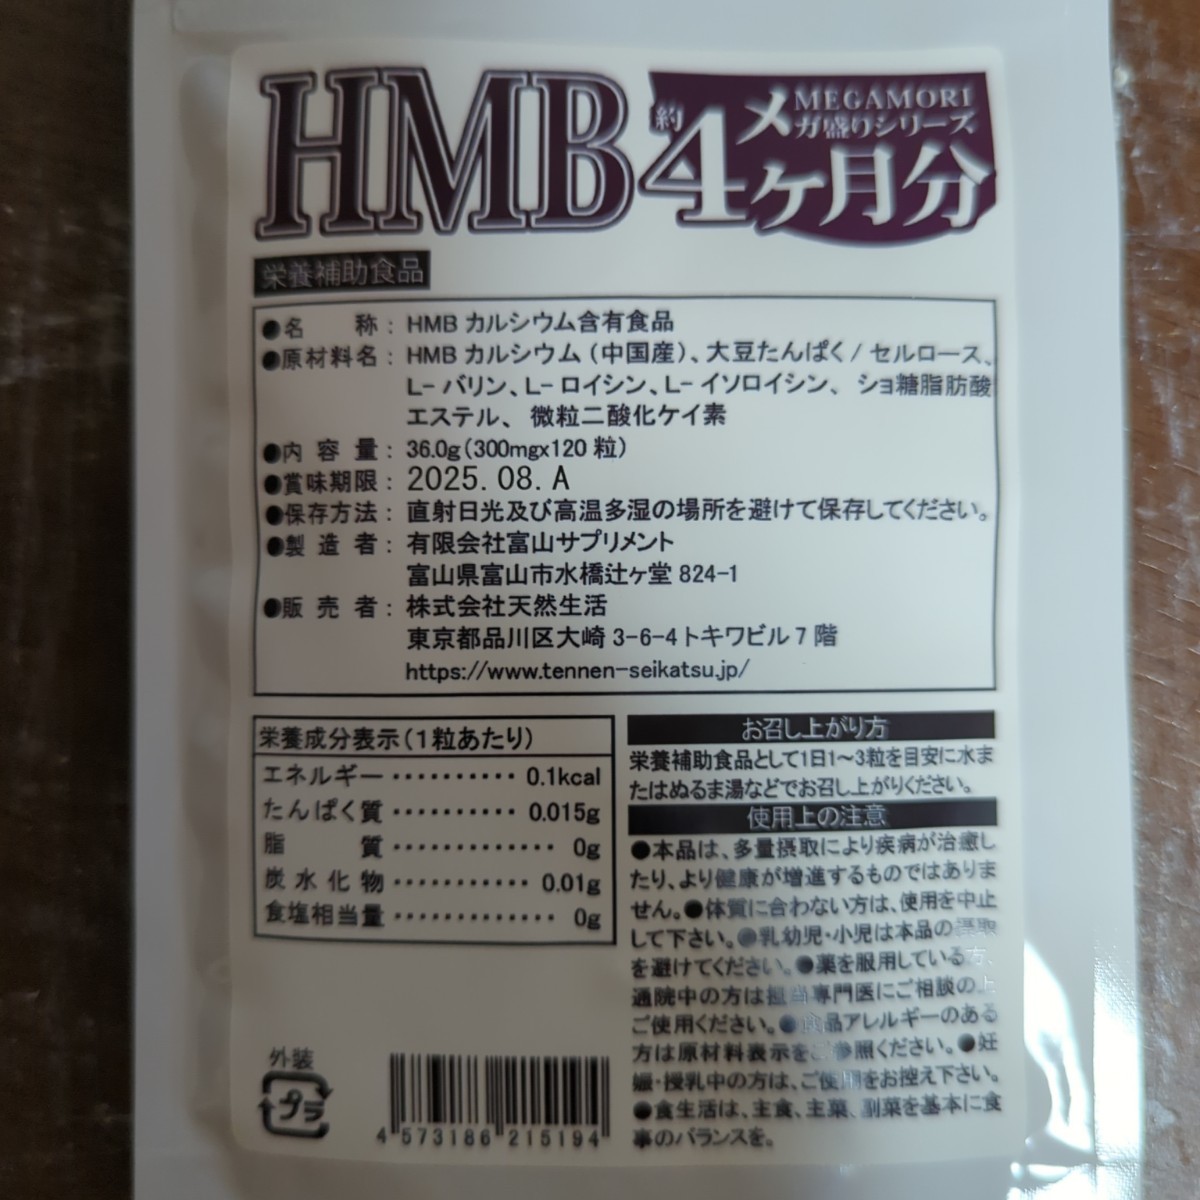 HMB supplement .... approximately 4 months minute 